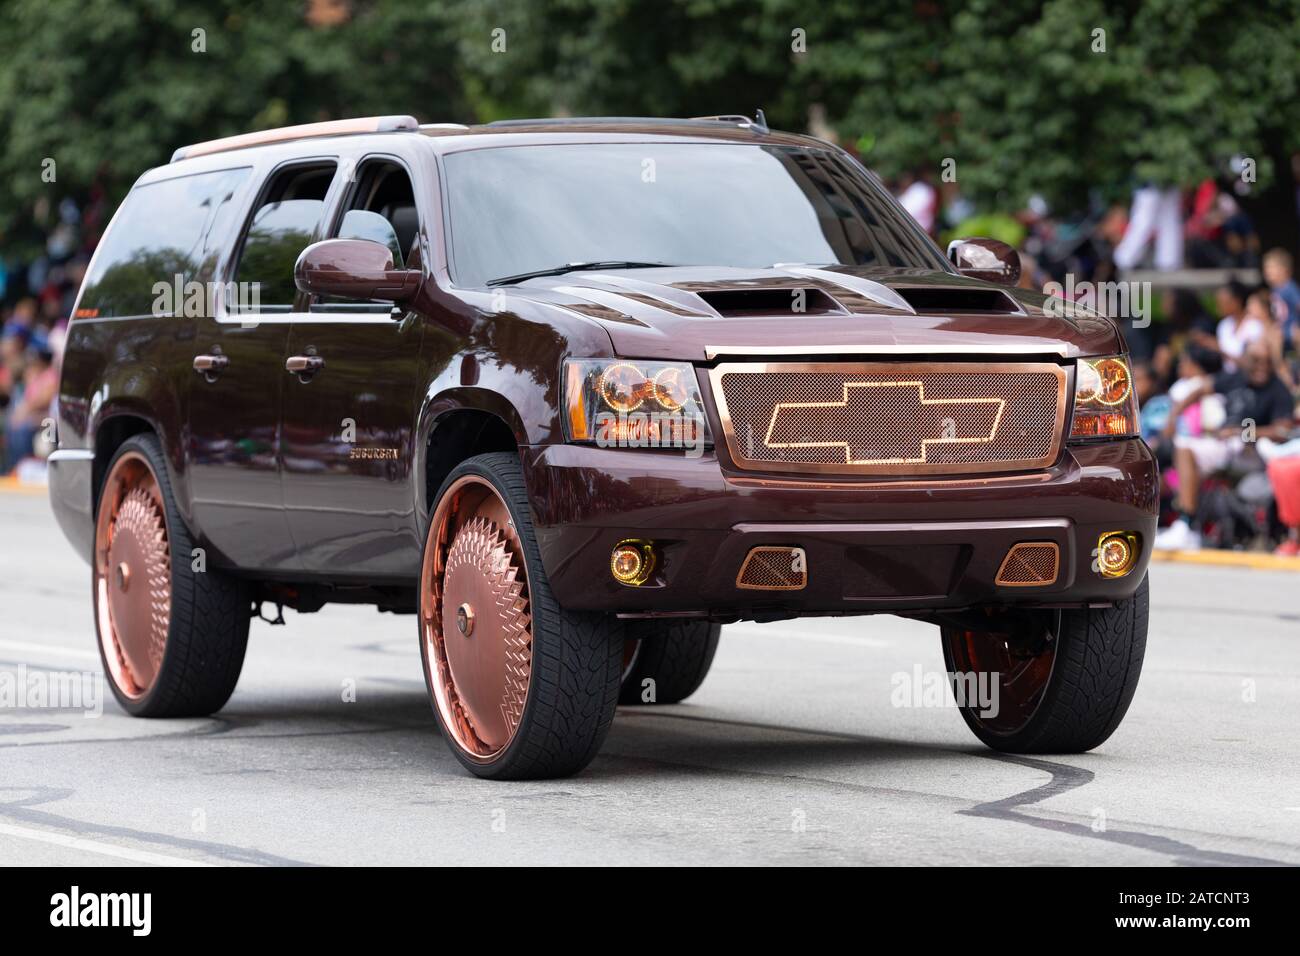 Indianapolis, Indiana, USA - September 28, 2019: The Circle City Classic Parade, A donked Chevrolet SUV going down Pennsylvania street at the parade Stock Photo